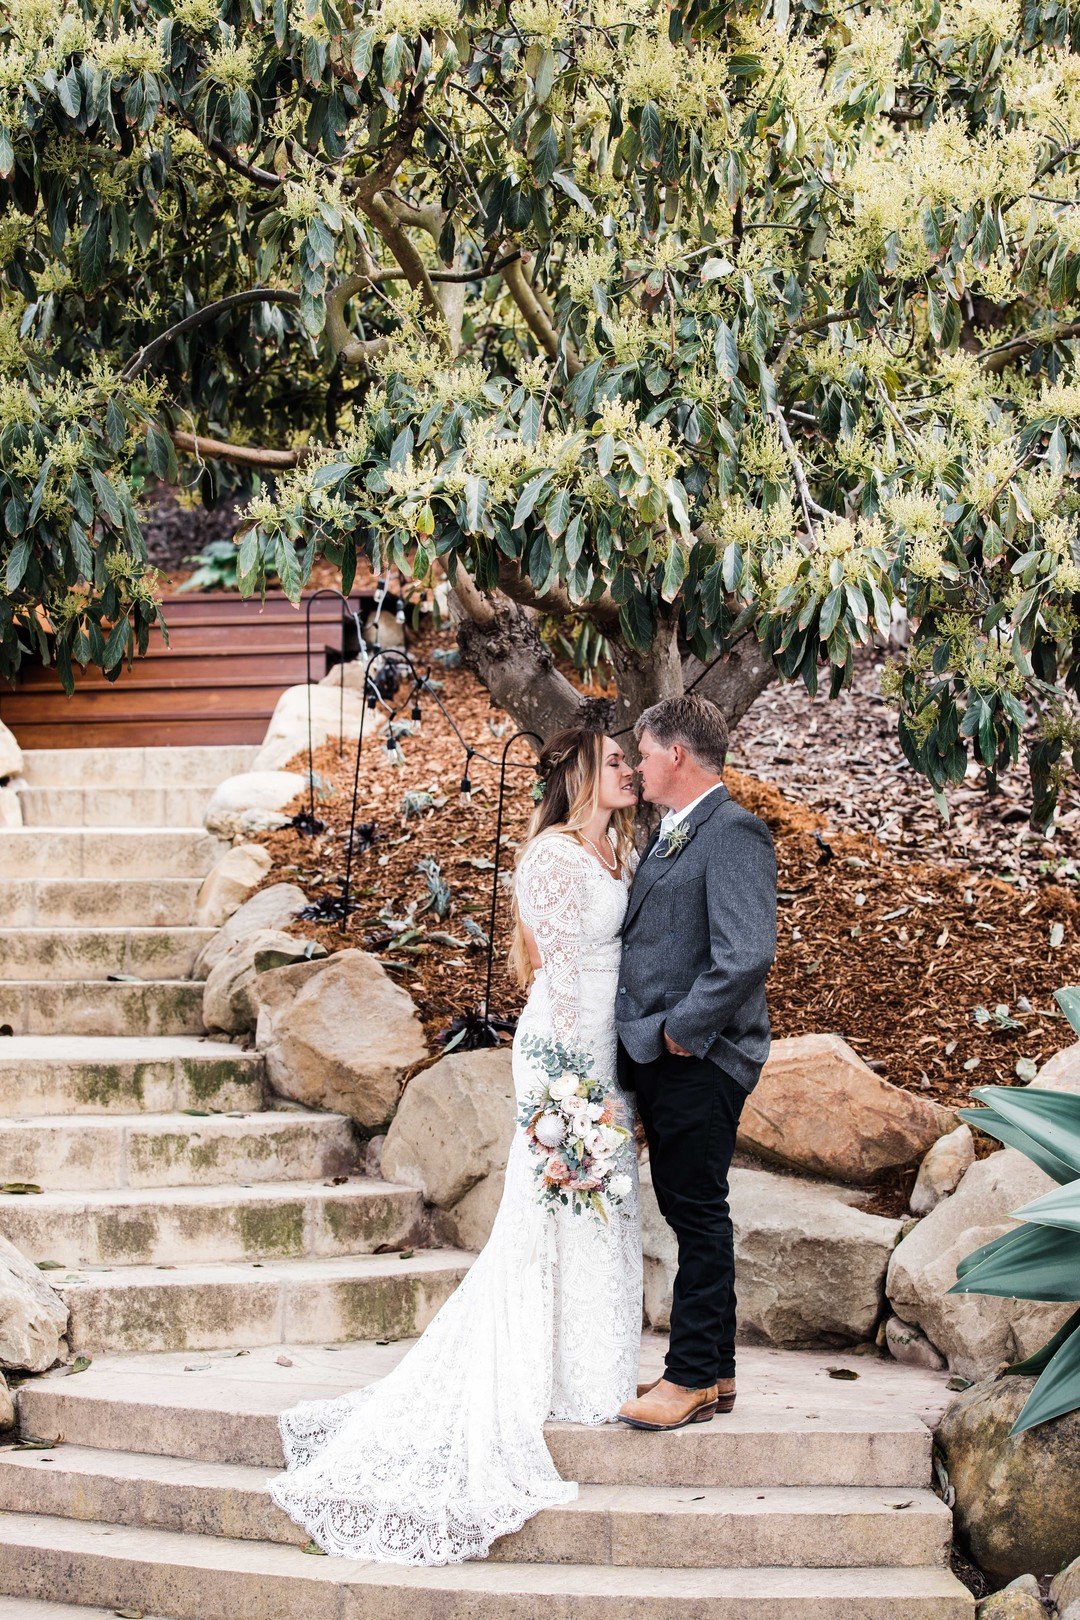 www.santabarbarawedding.com | Just Kiss Collective | Craddock Ranch | Alia Glasgow | Dulce Floral Design | Bride and Groom Share a Moment on the Stairs